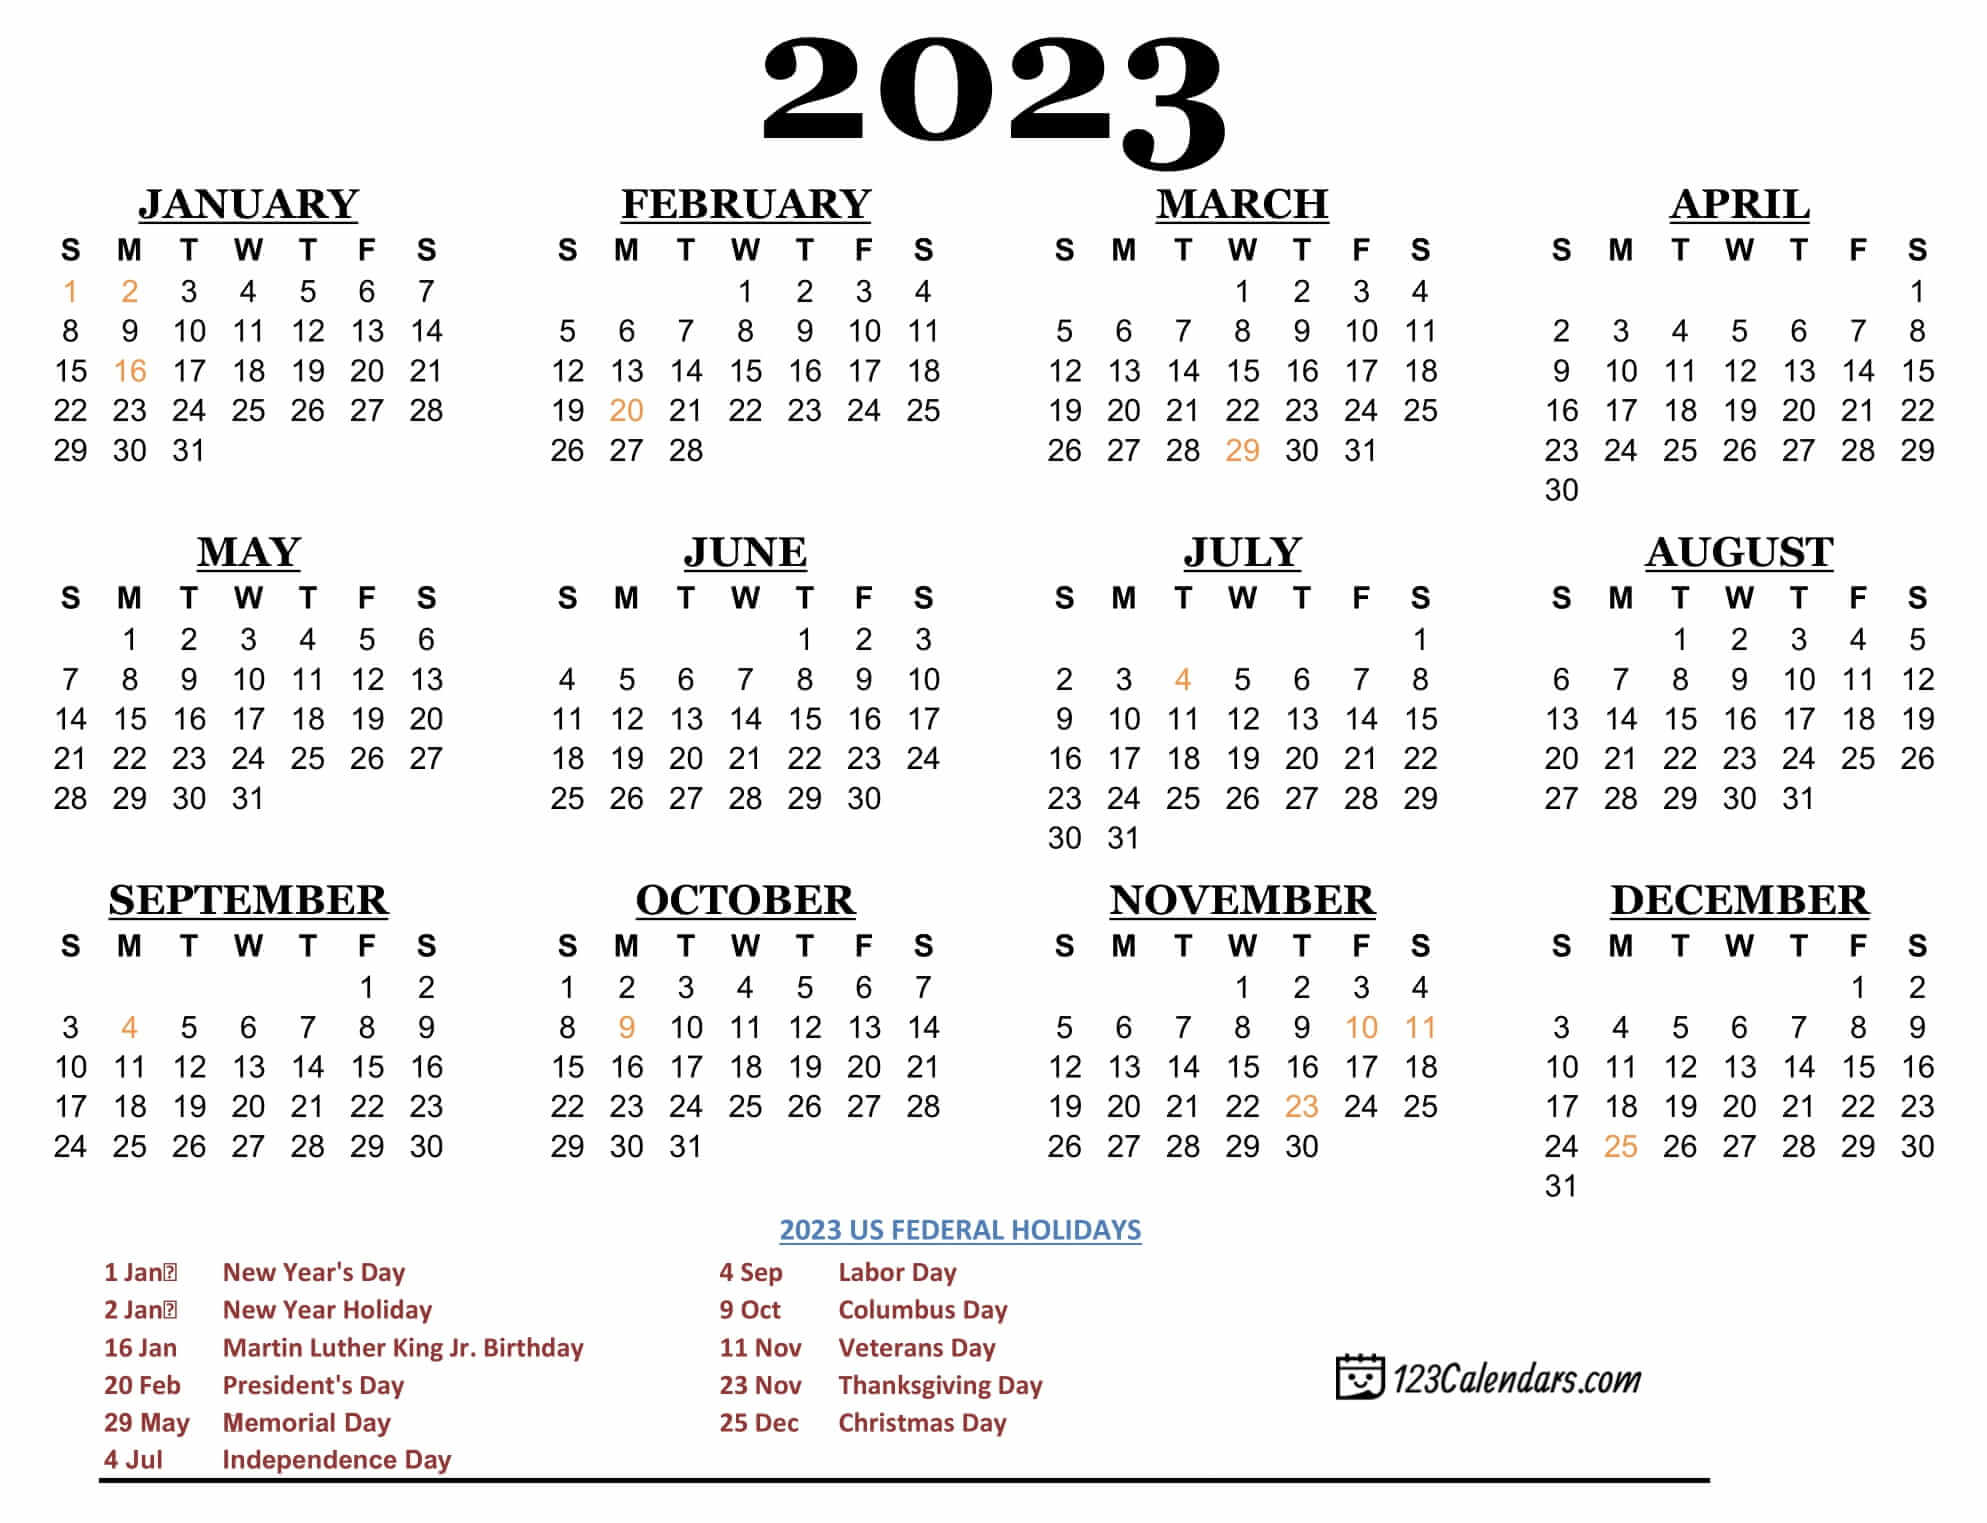 2023-calendar-is-the-same-as-what-year-get-latest-2023-news-update